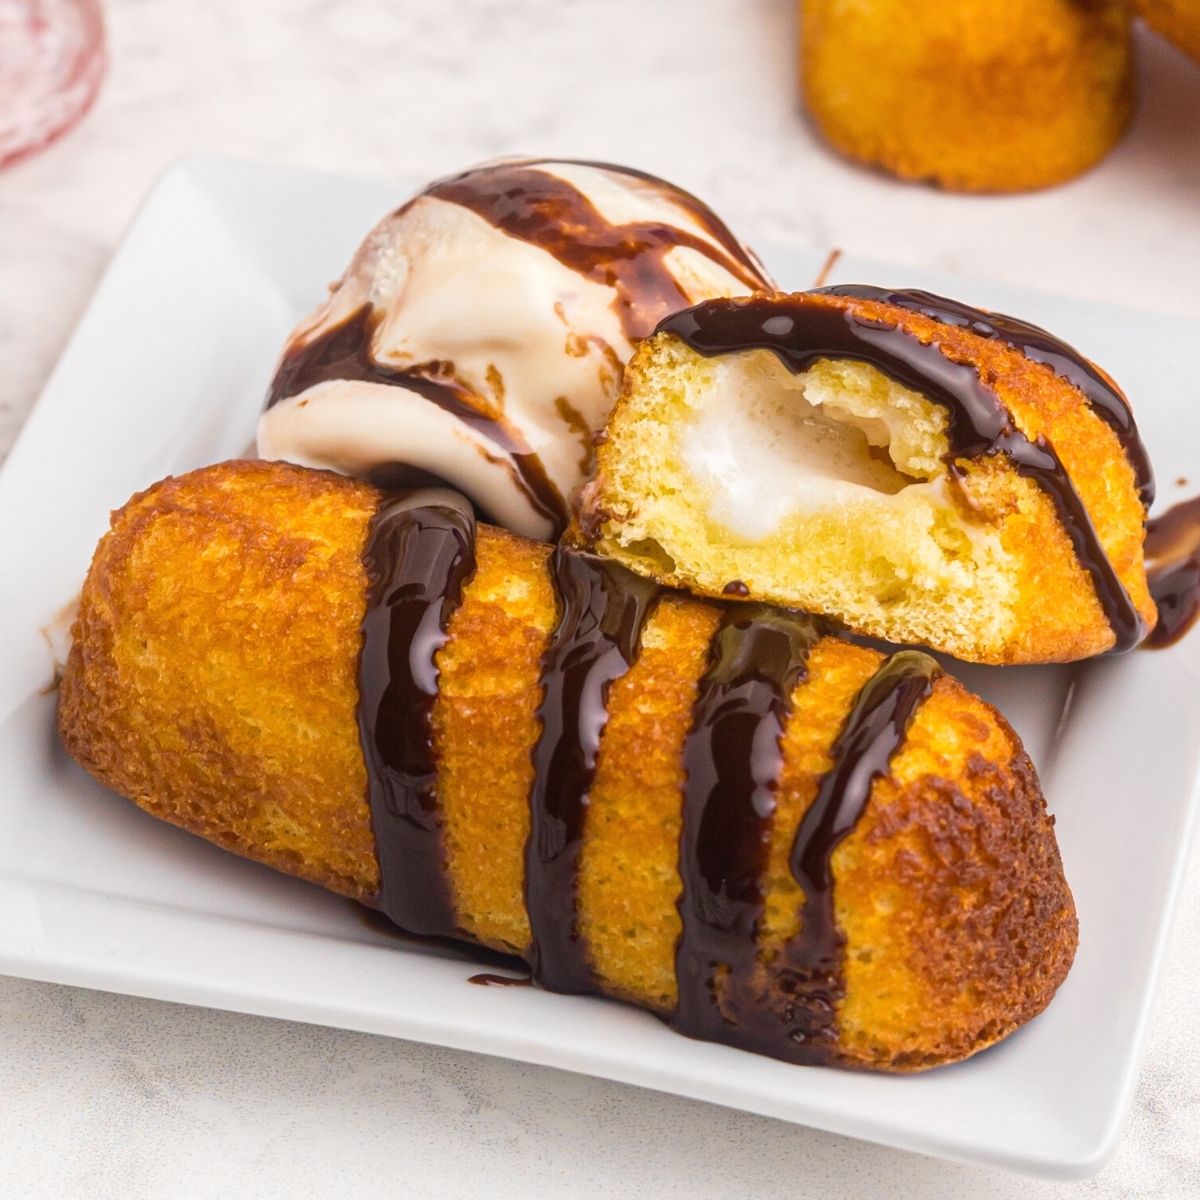 Golden crispy twinkie on a white plate served with ice cream and drizzled with chocolate sauce